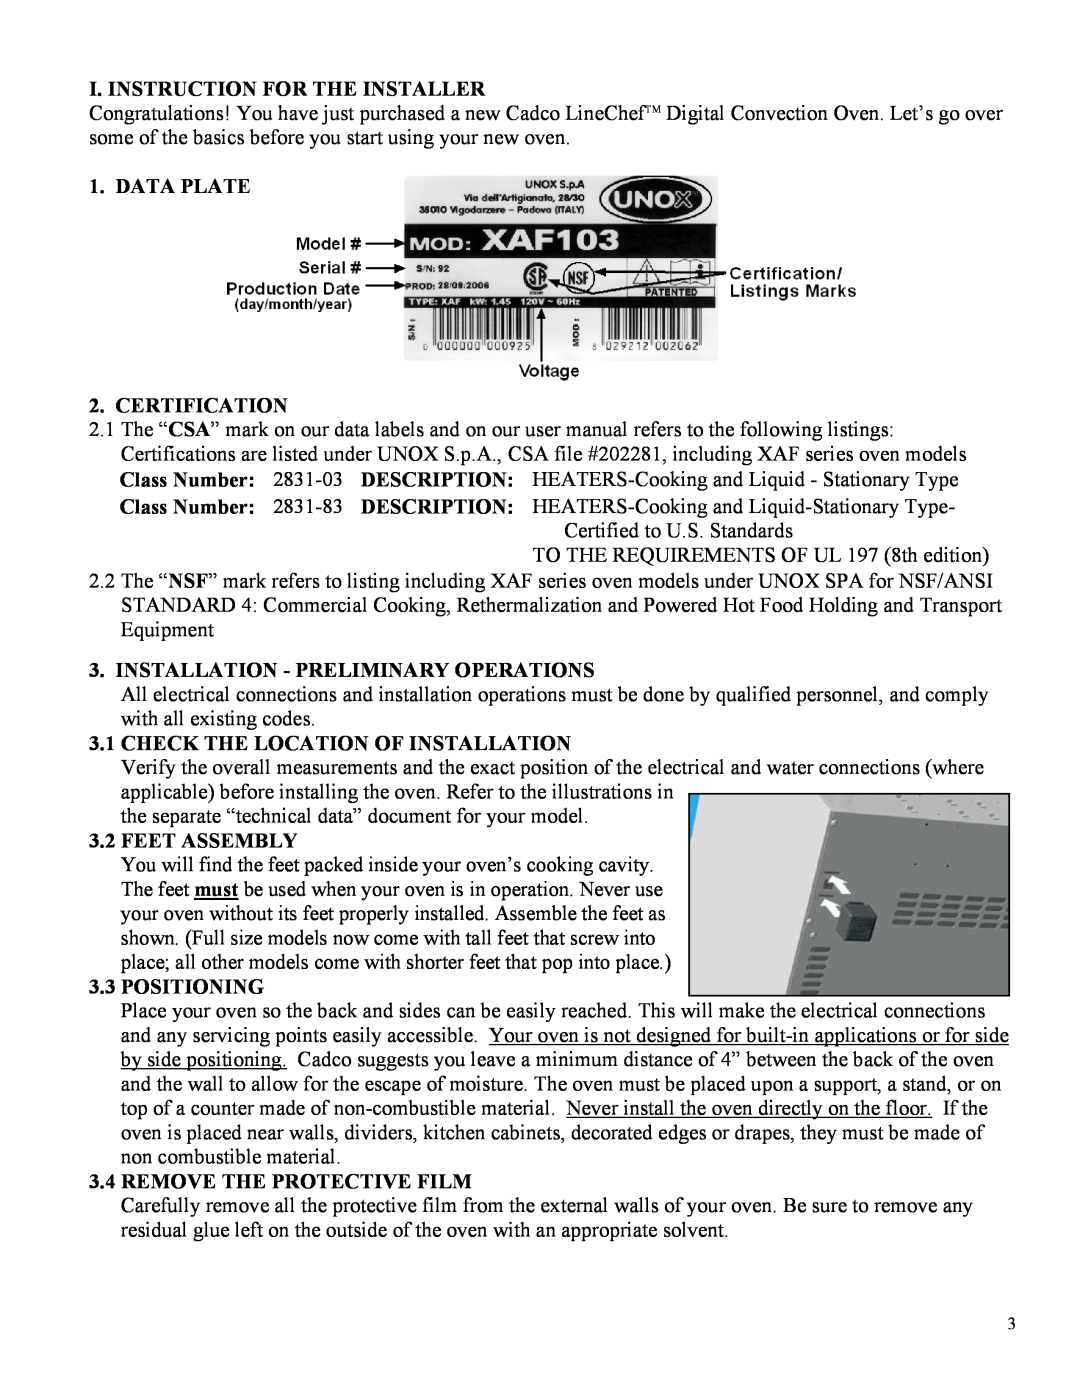 Cadco XAF-188 I. Instruction For The Installer, DATA PLATE 2. CERTIFICATION, Installation - Preliminary Operations 